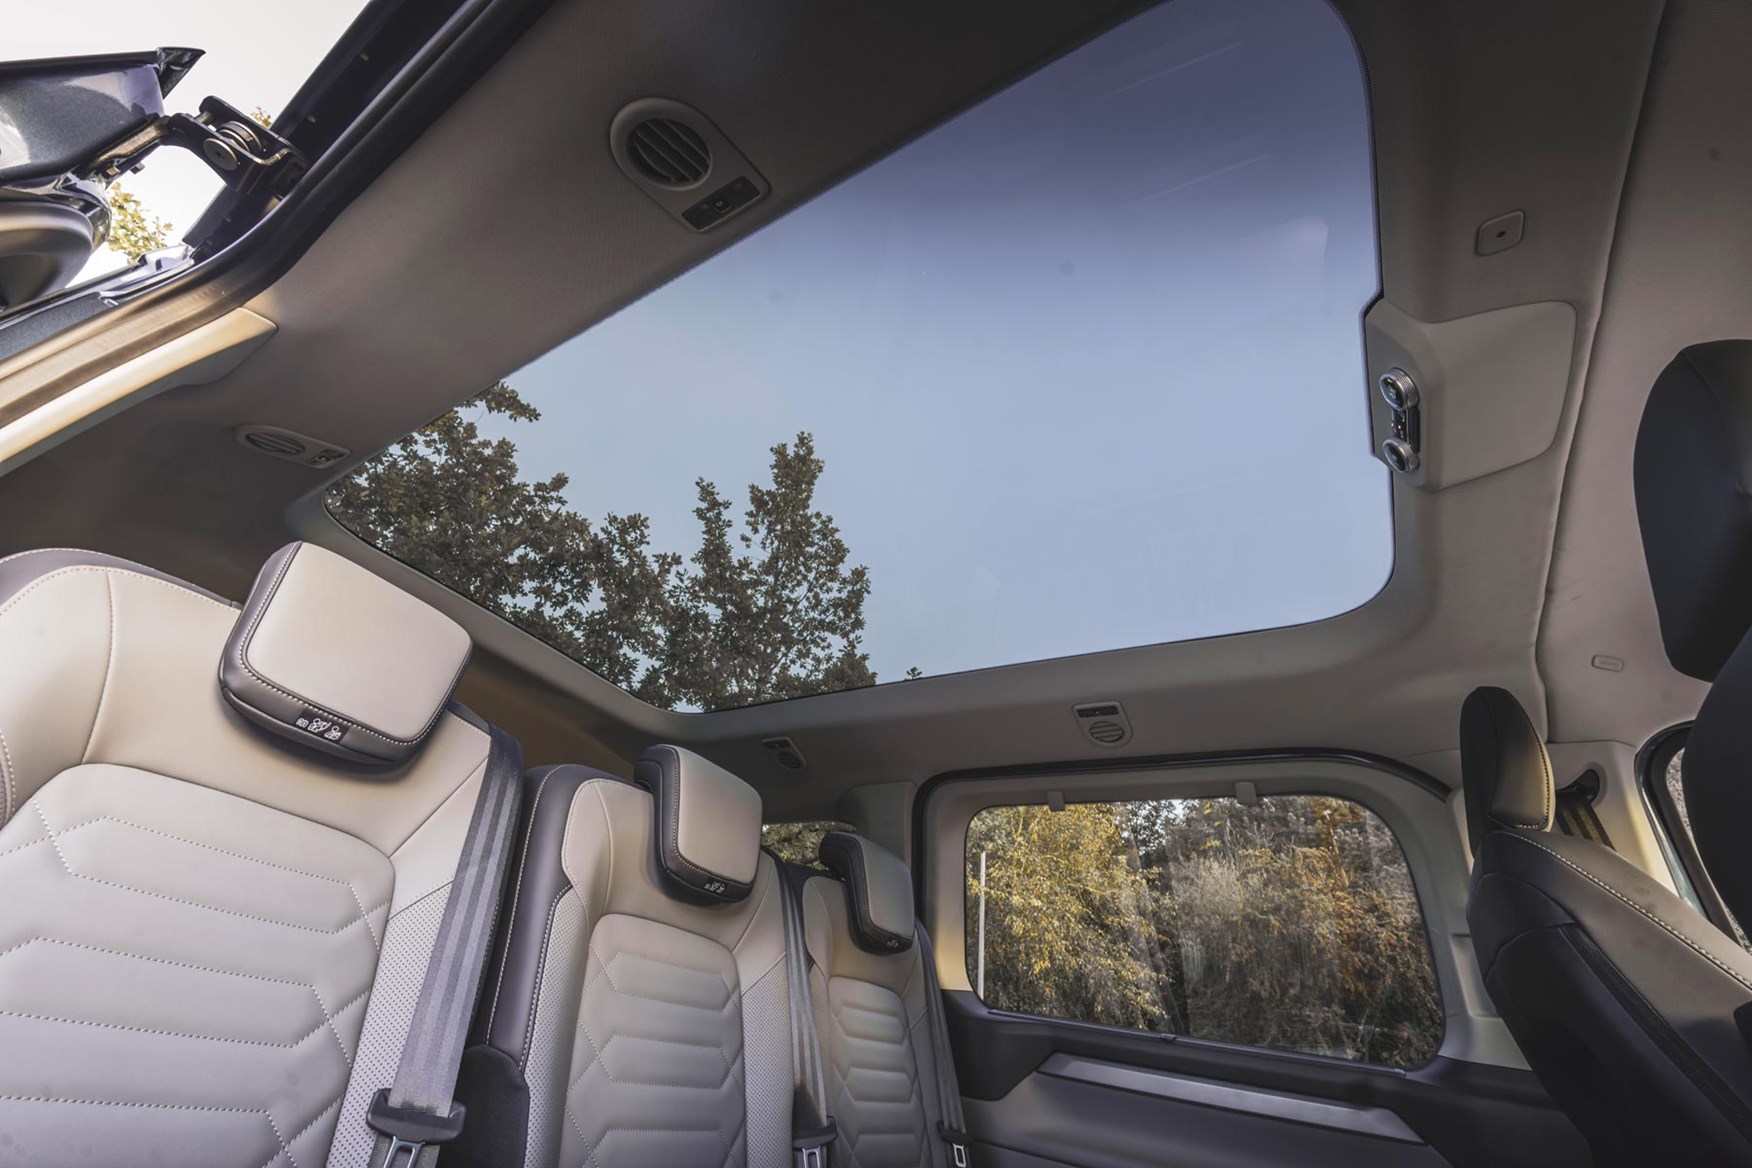 The panoramic roof is a great feature to have.